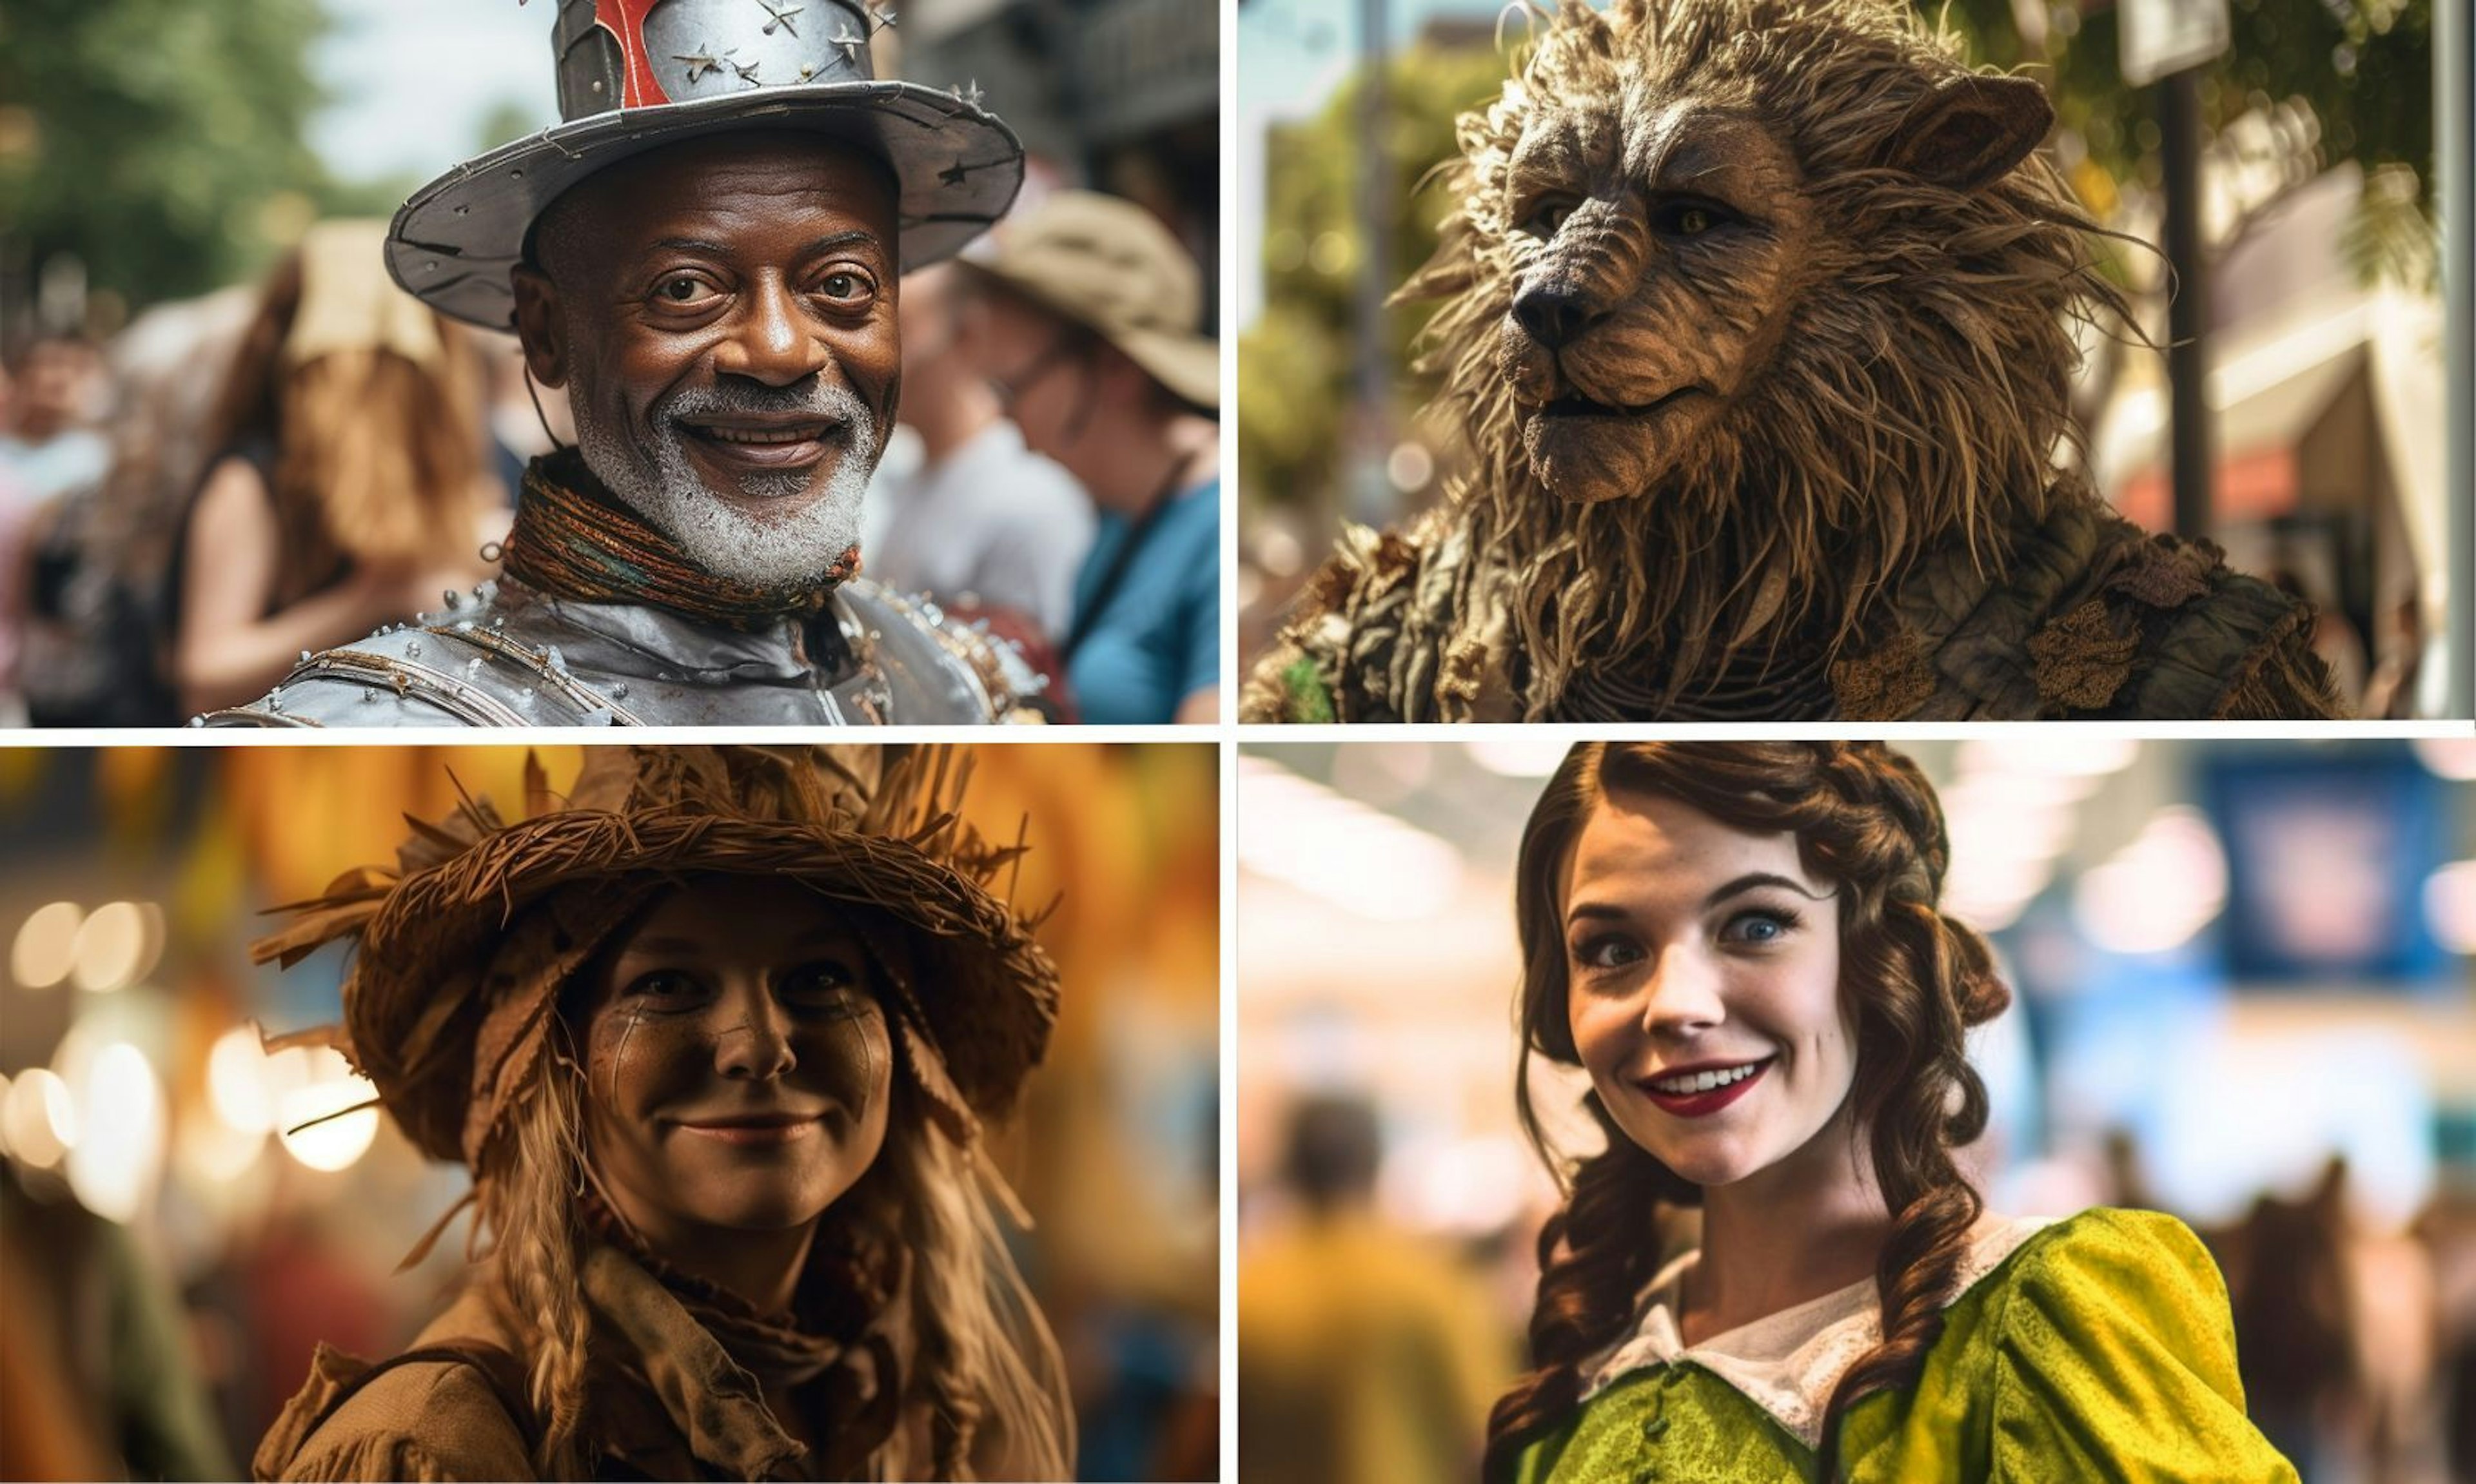 The Oz Escape: An Immersive New Orleans Experience